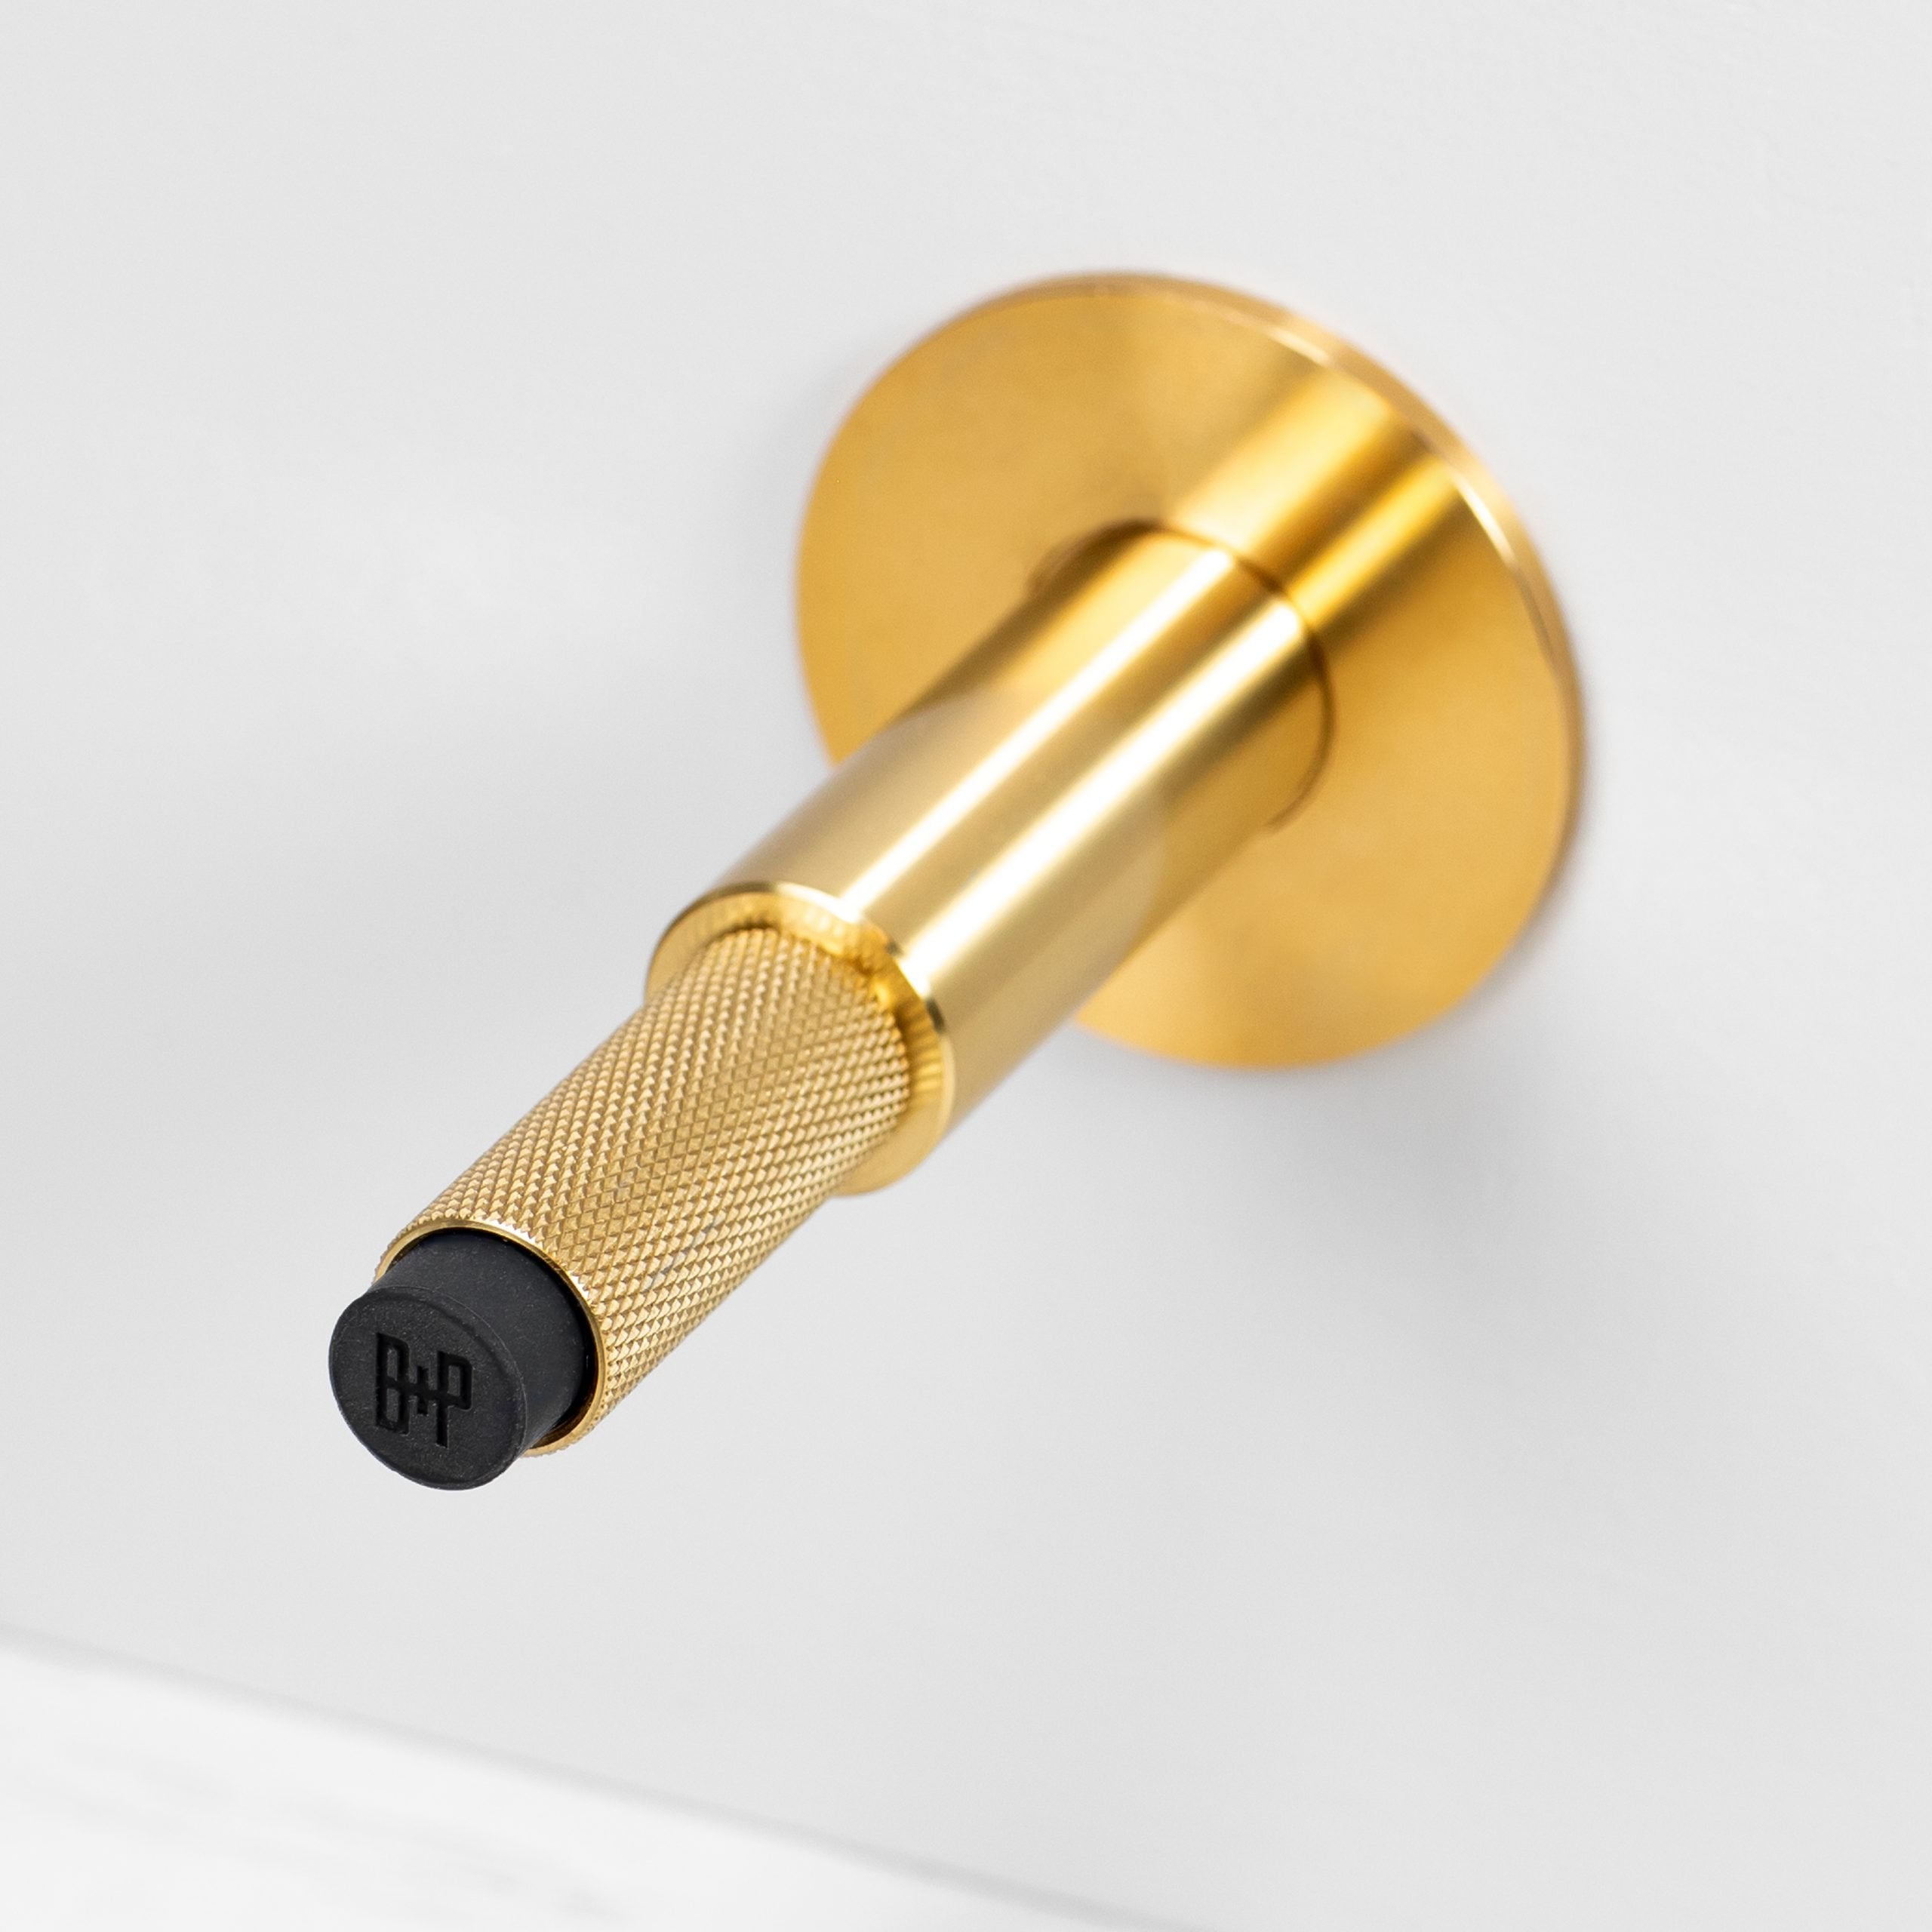 Buster + Punch Wall Mounted Door Stop Hardware Buster + Punch Brass  